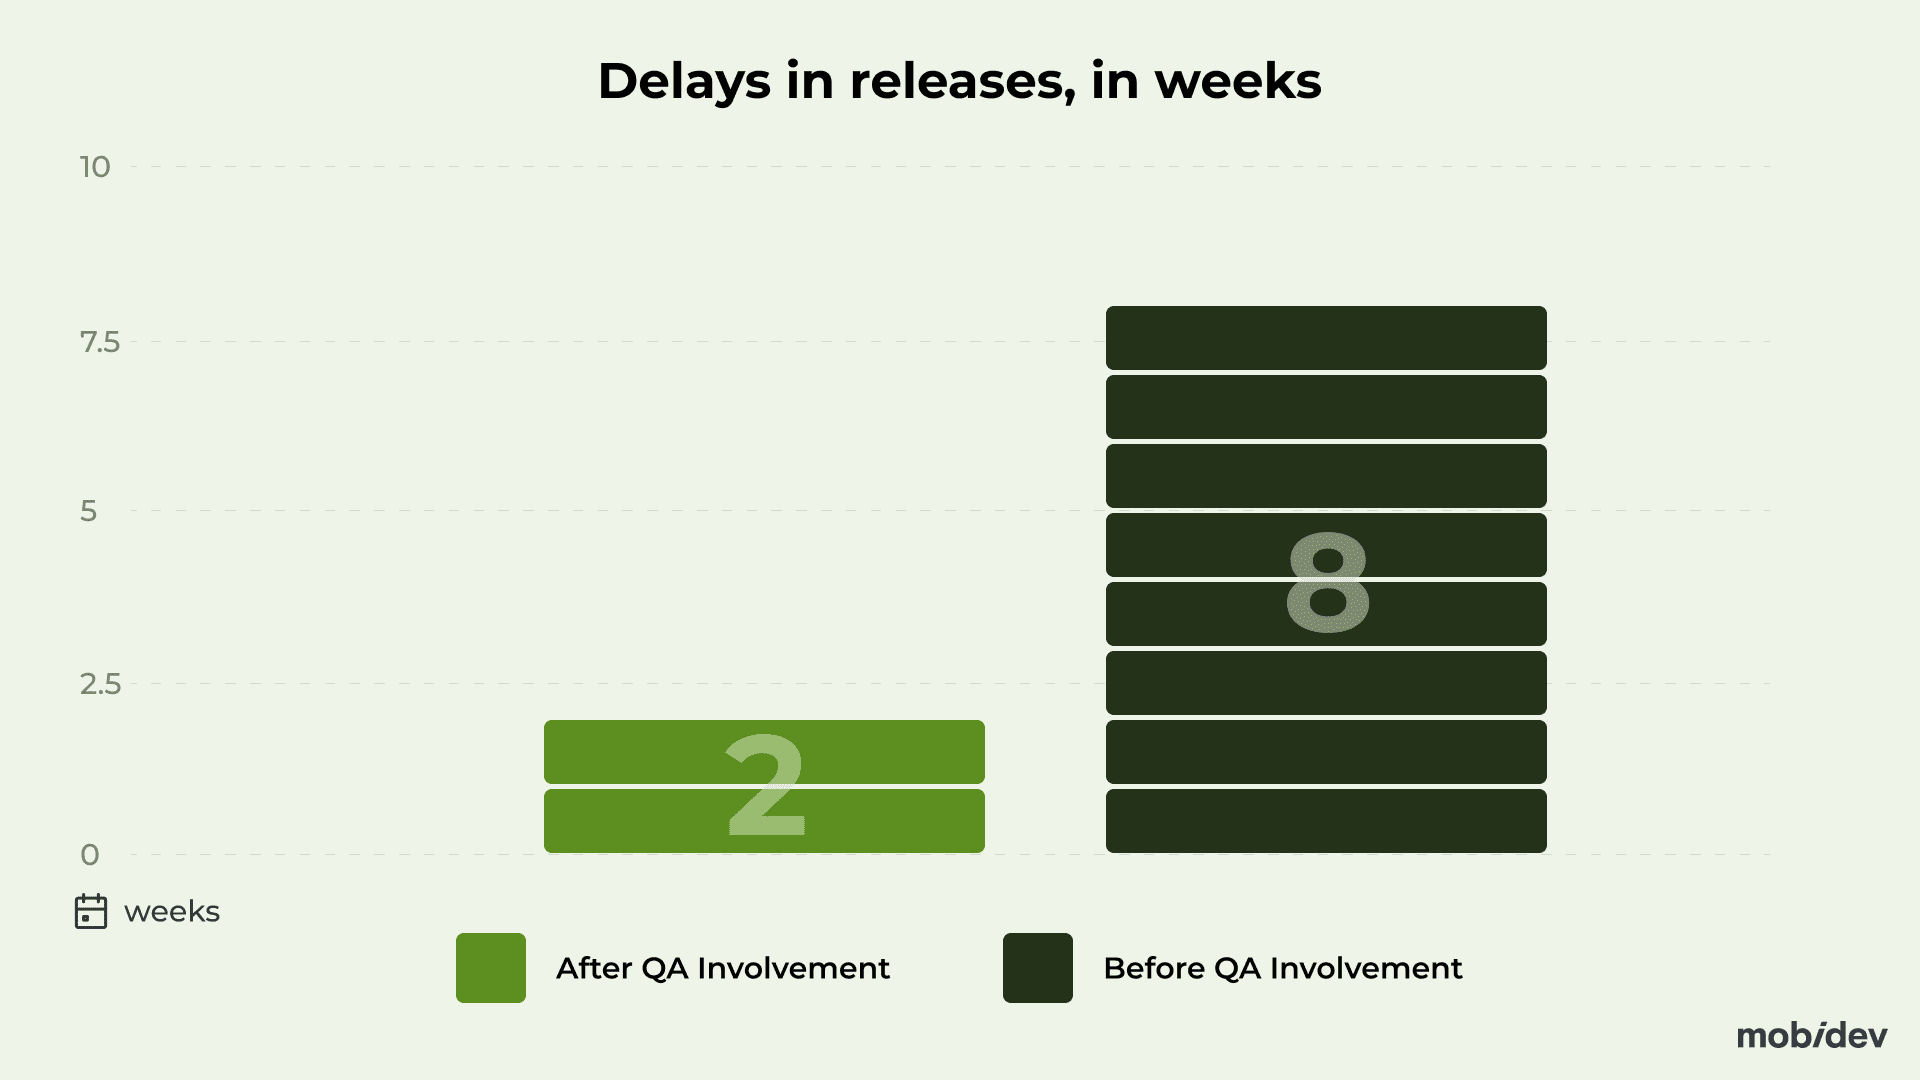 Delays in releases before and after QA involvement